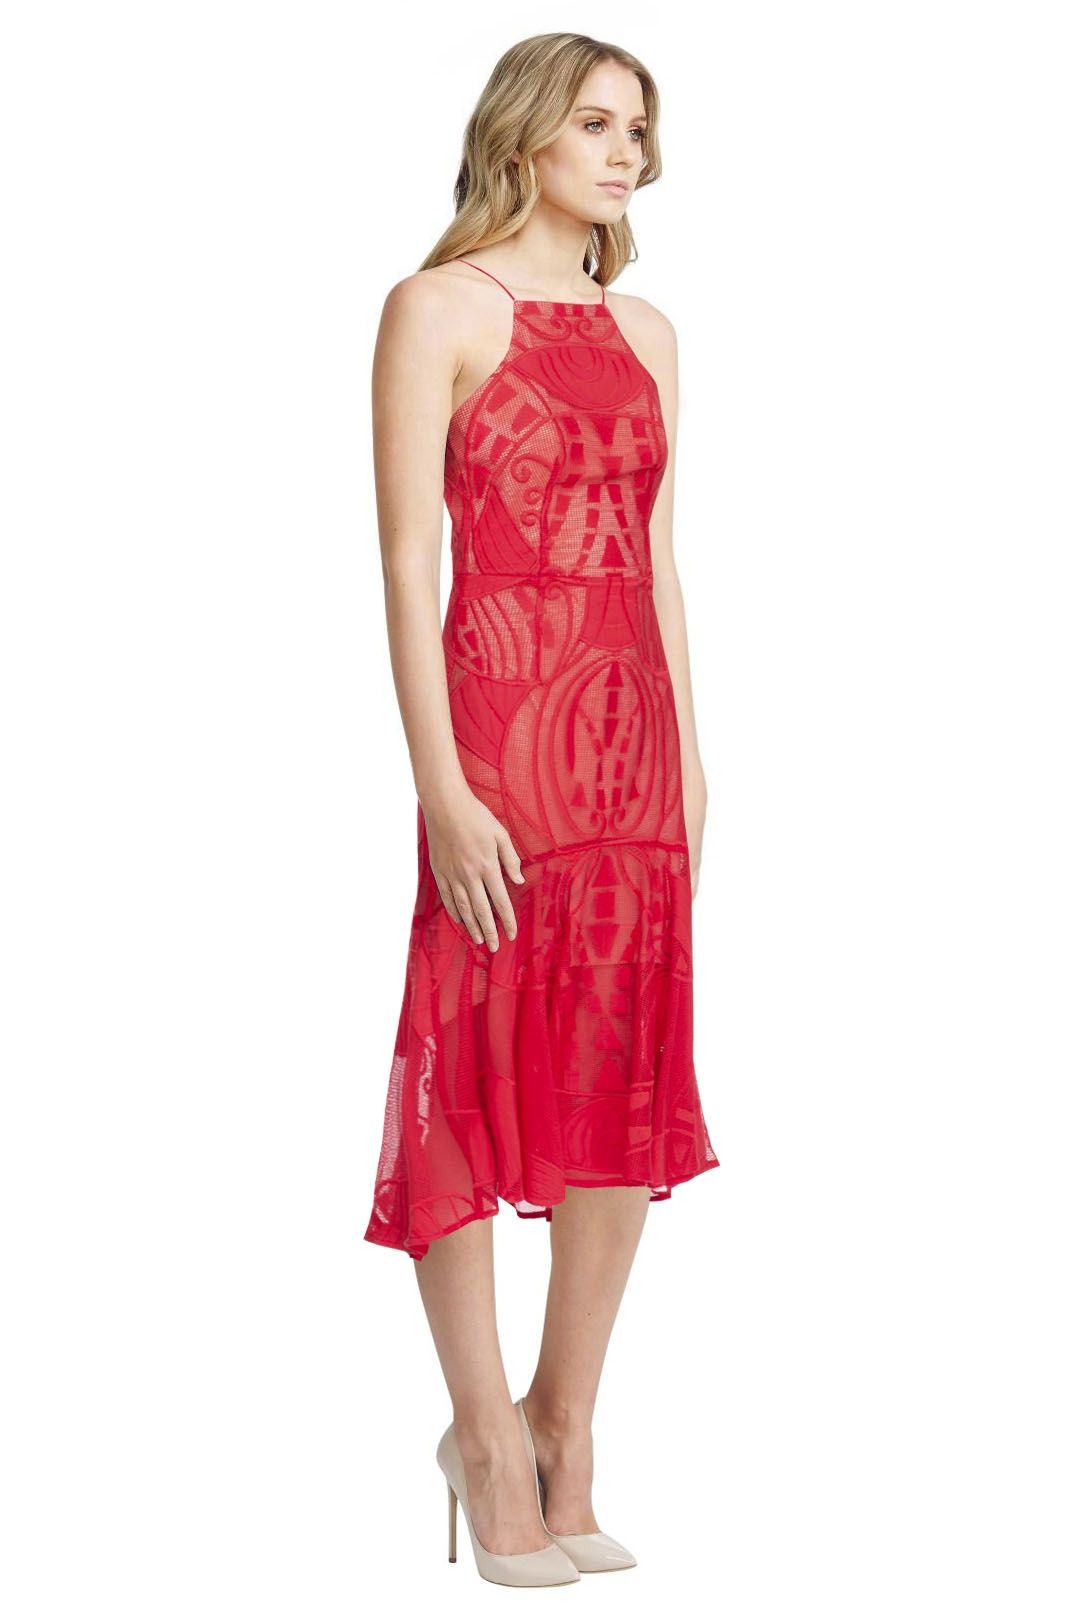 Thurley - Tabitha Dress - Red - Side